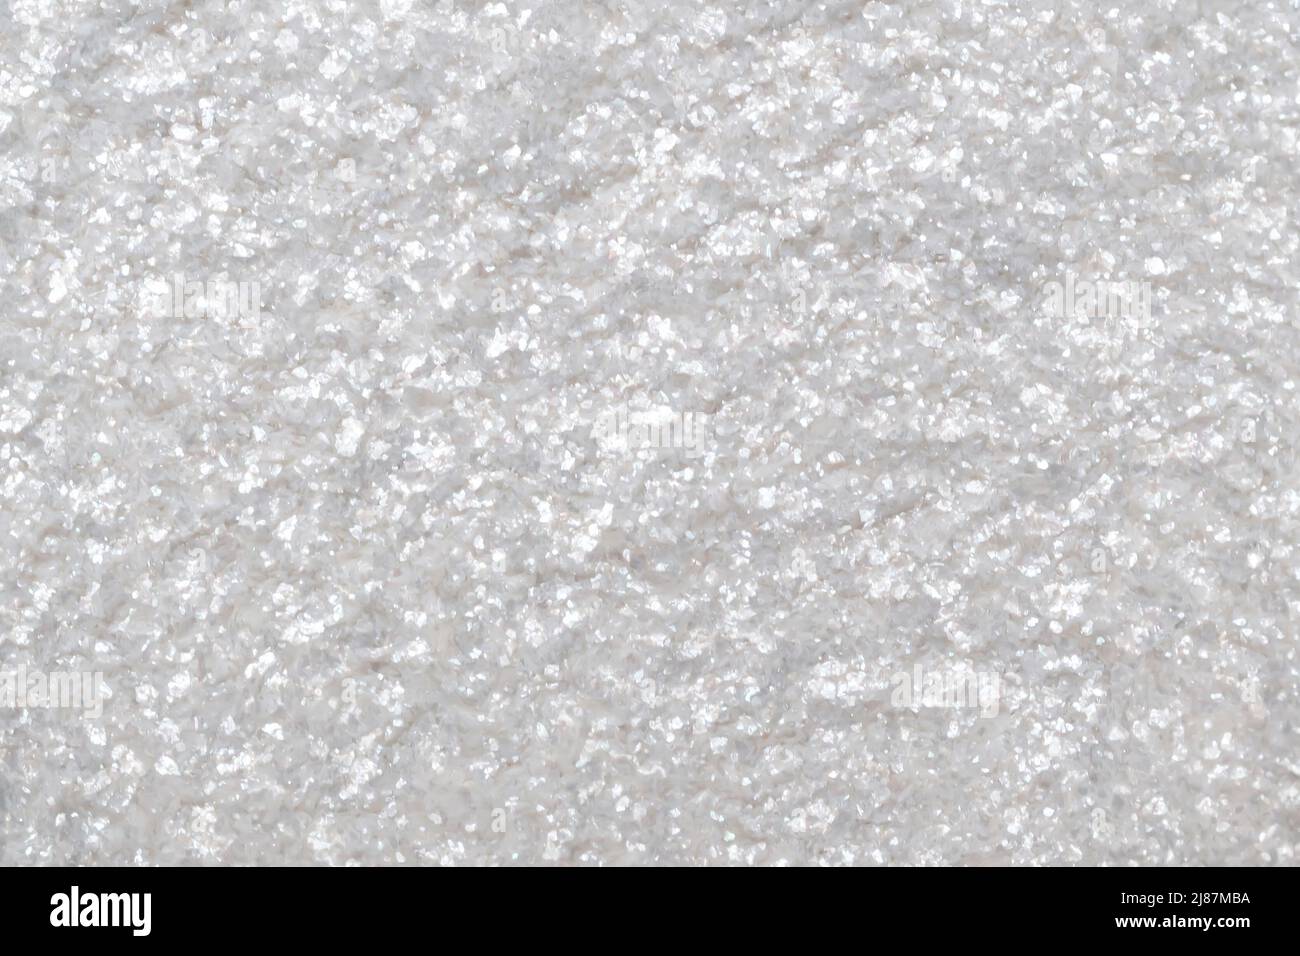 Blurred white glitter background. Sparkling and shimmering texture Stock  Photo - Alamy